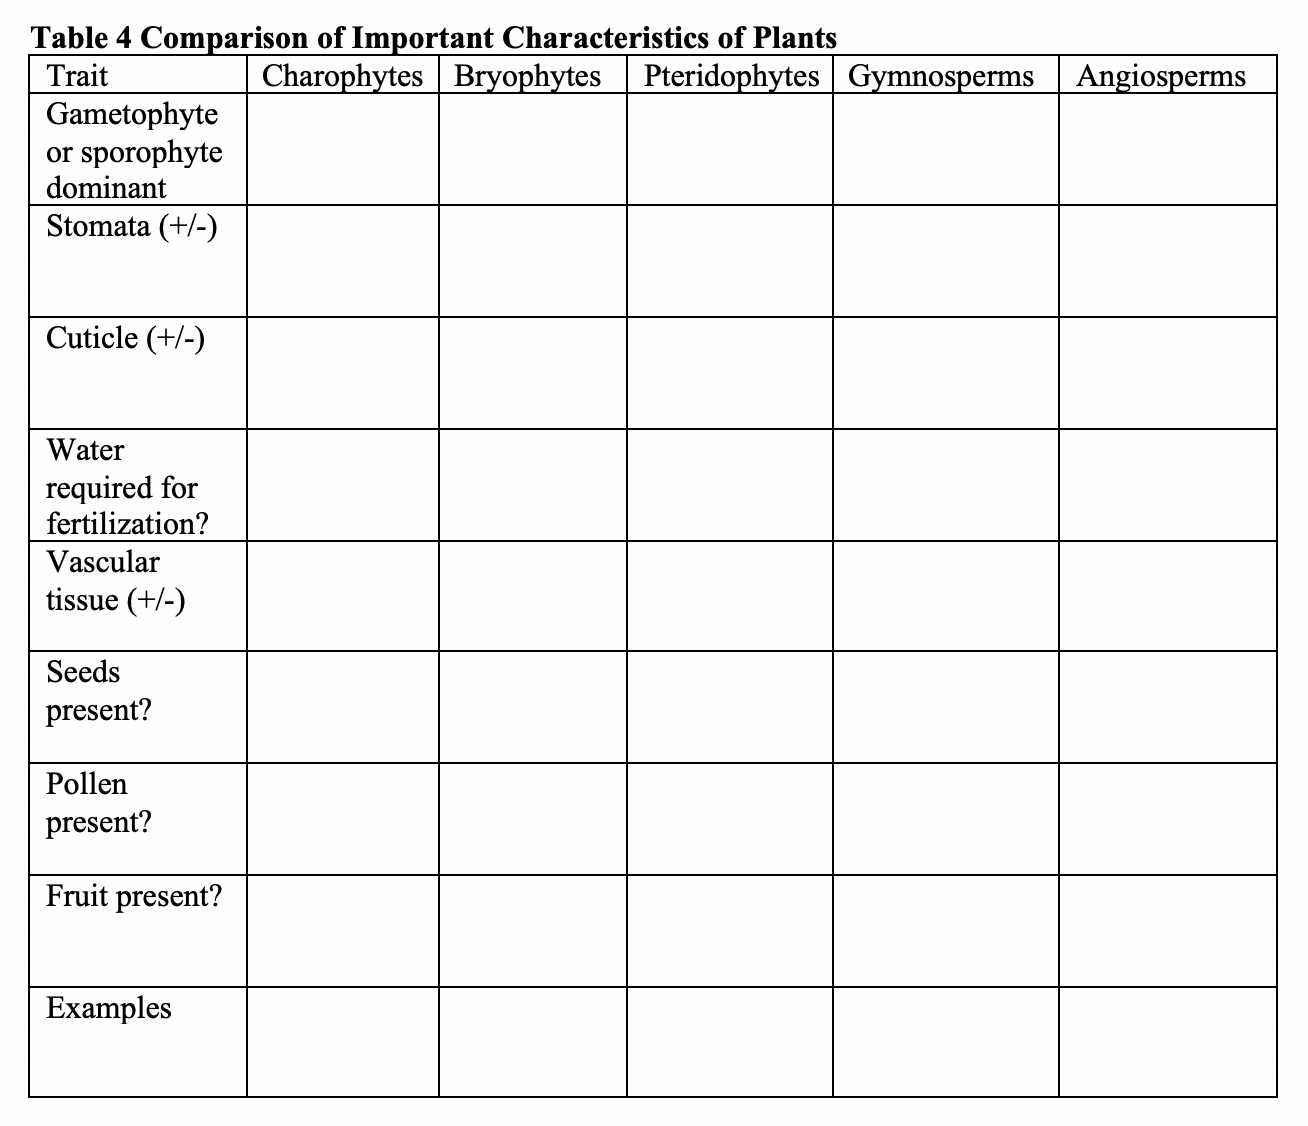 Table 4 Comparison of Important Characteristics of Plants
Trait
Charophytes Bryophytes Pteridophytes Gymnosperms Angiosperms
Gametophyte
or sporophyte
dominant
Stomata (+/-)
Cuticle (+/-)
Water
required for
fertilization?
Vascular
tissue (+/-)
Seeds
present?
Pollen
present?
Fruit present?
Examples
